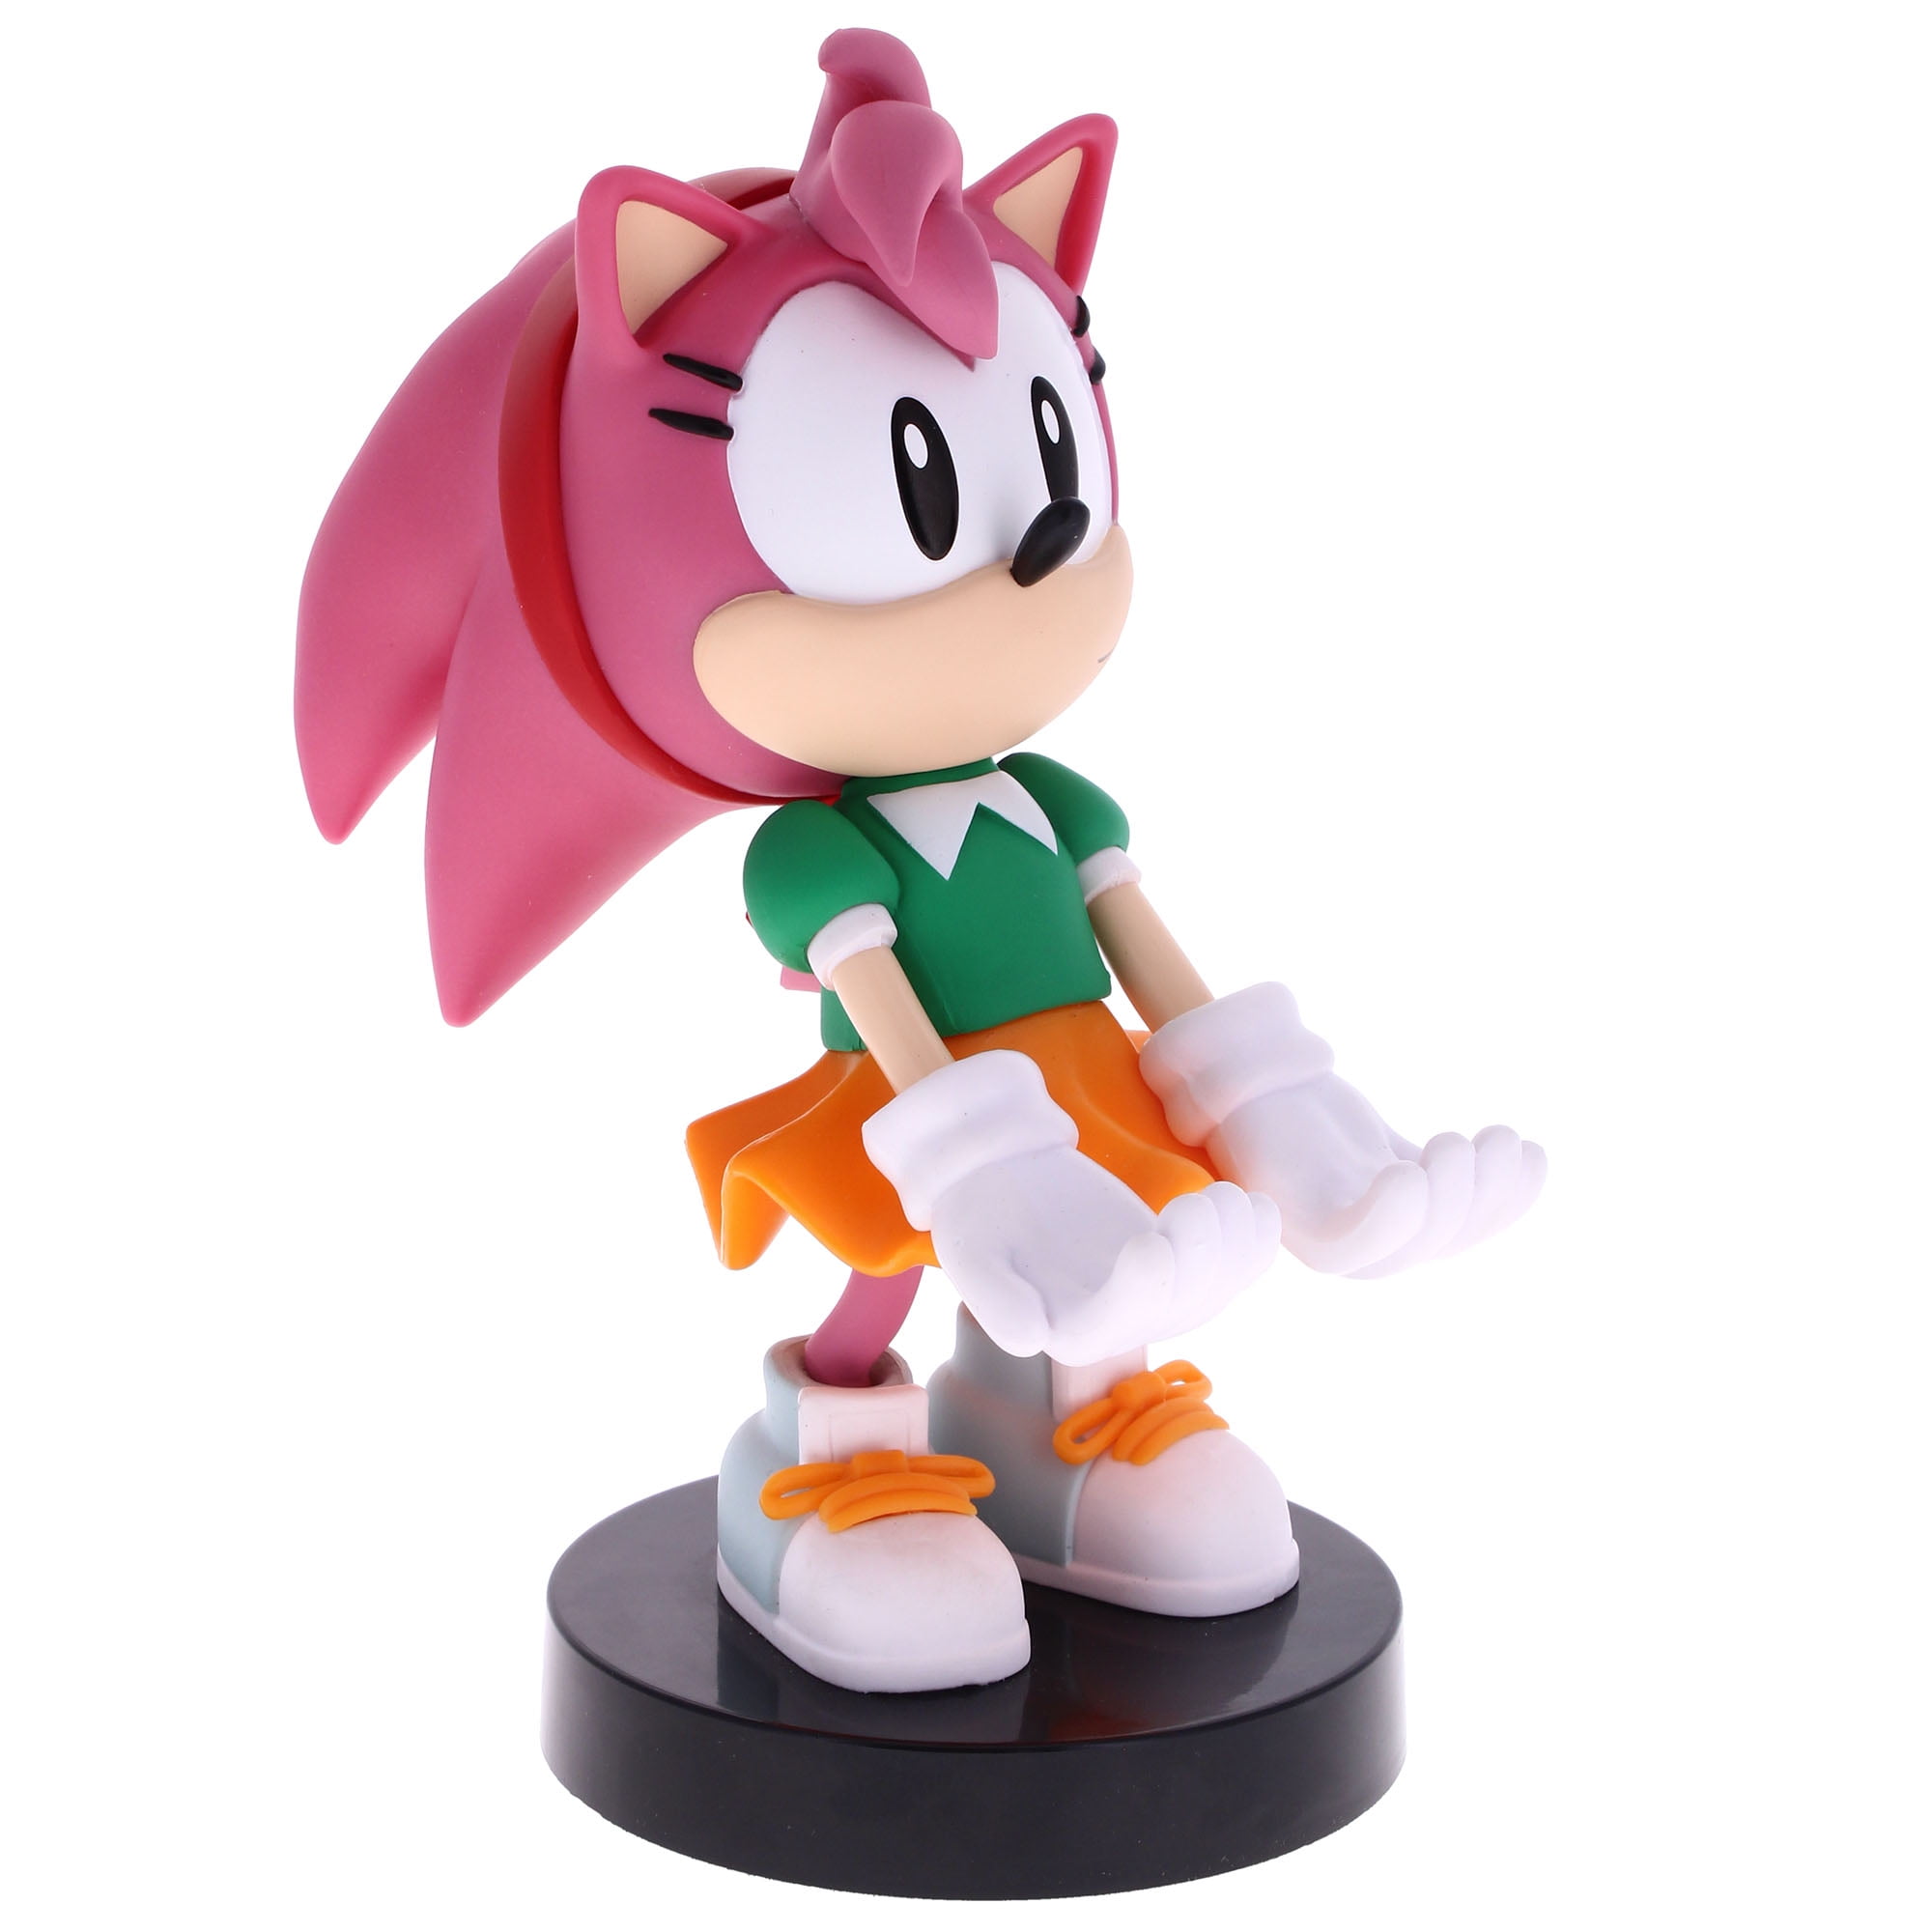 Exquisite Gaming: SEGA: Amy Rose - Original Mobile Phone & Gaming Controller Holder, Device Stand, Cable Guys, Sonic the Hedgehog Licensed Figure